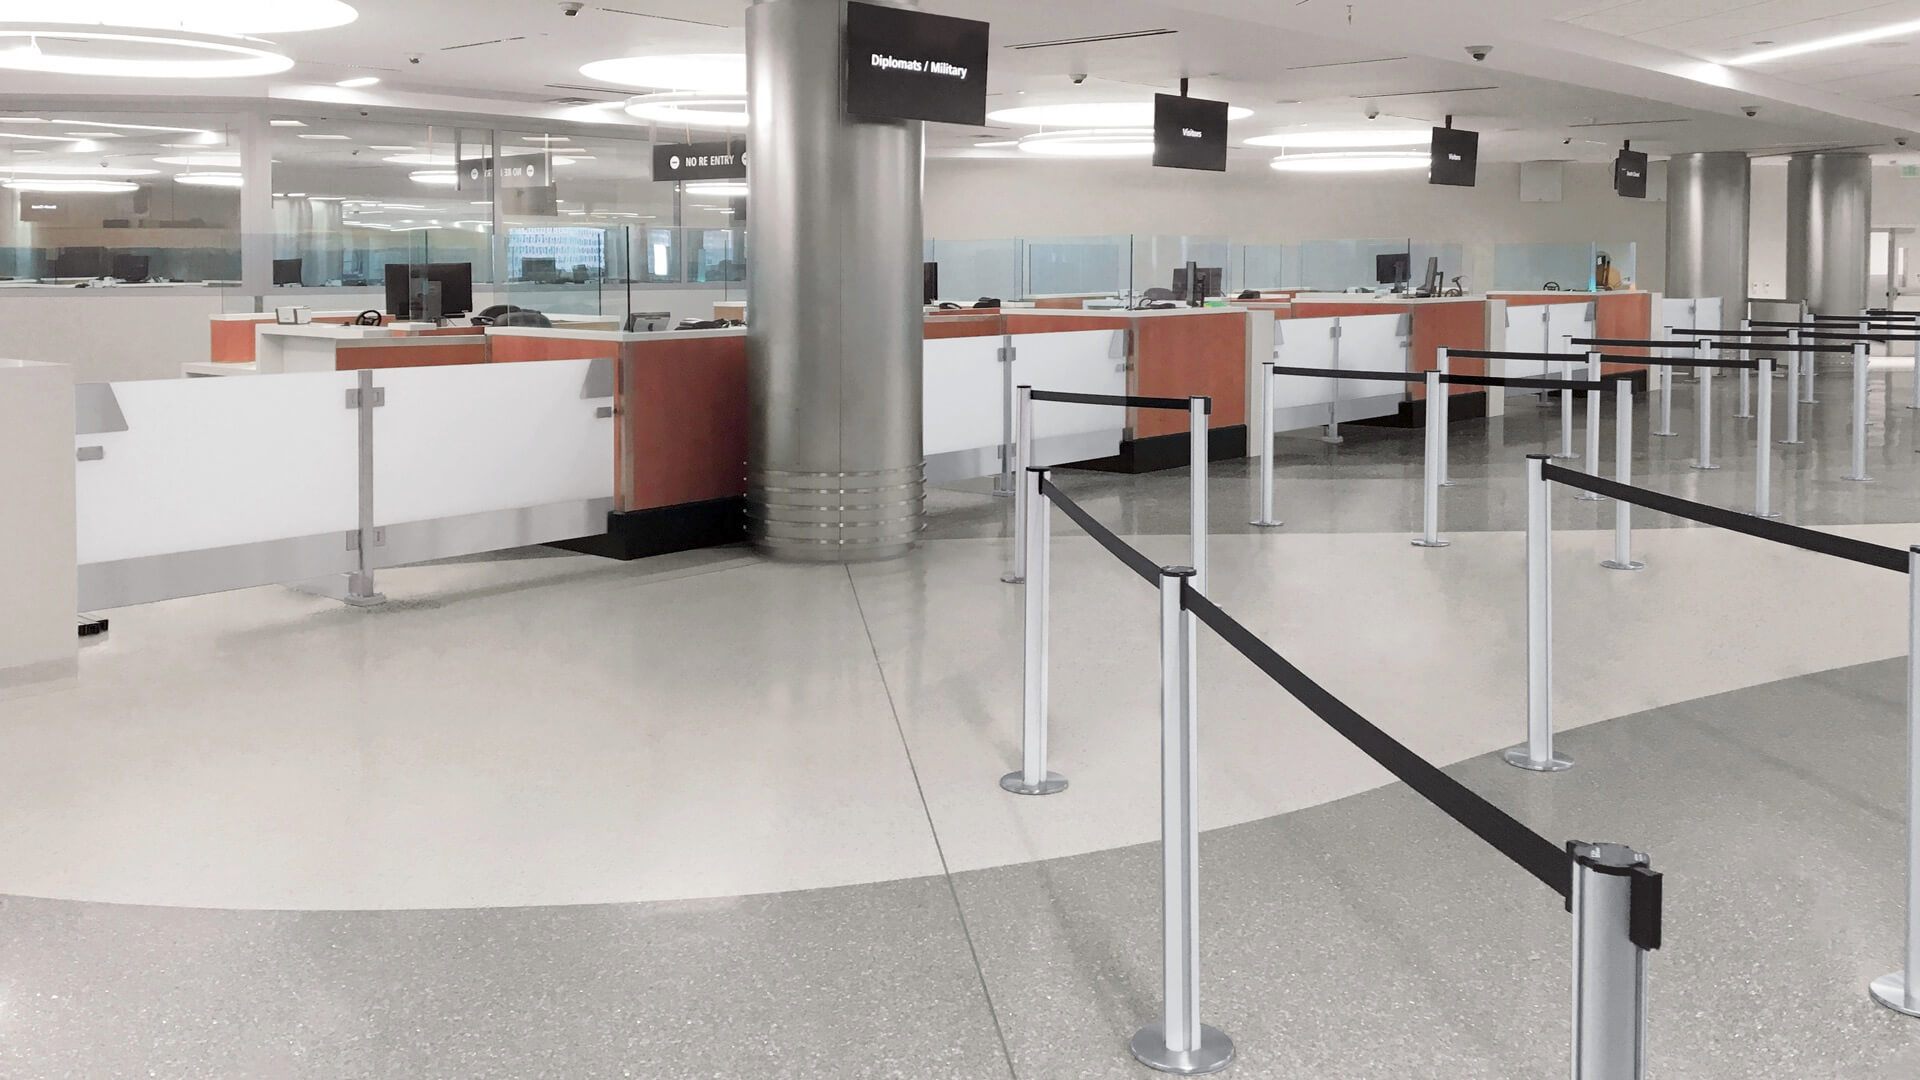 Airport,Queuing,Stanchions,MagneticBase,CurtainWall,Design/Architecture,Railings,GlassRailing,Security,Barriers